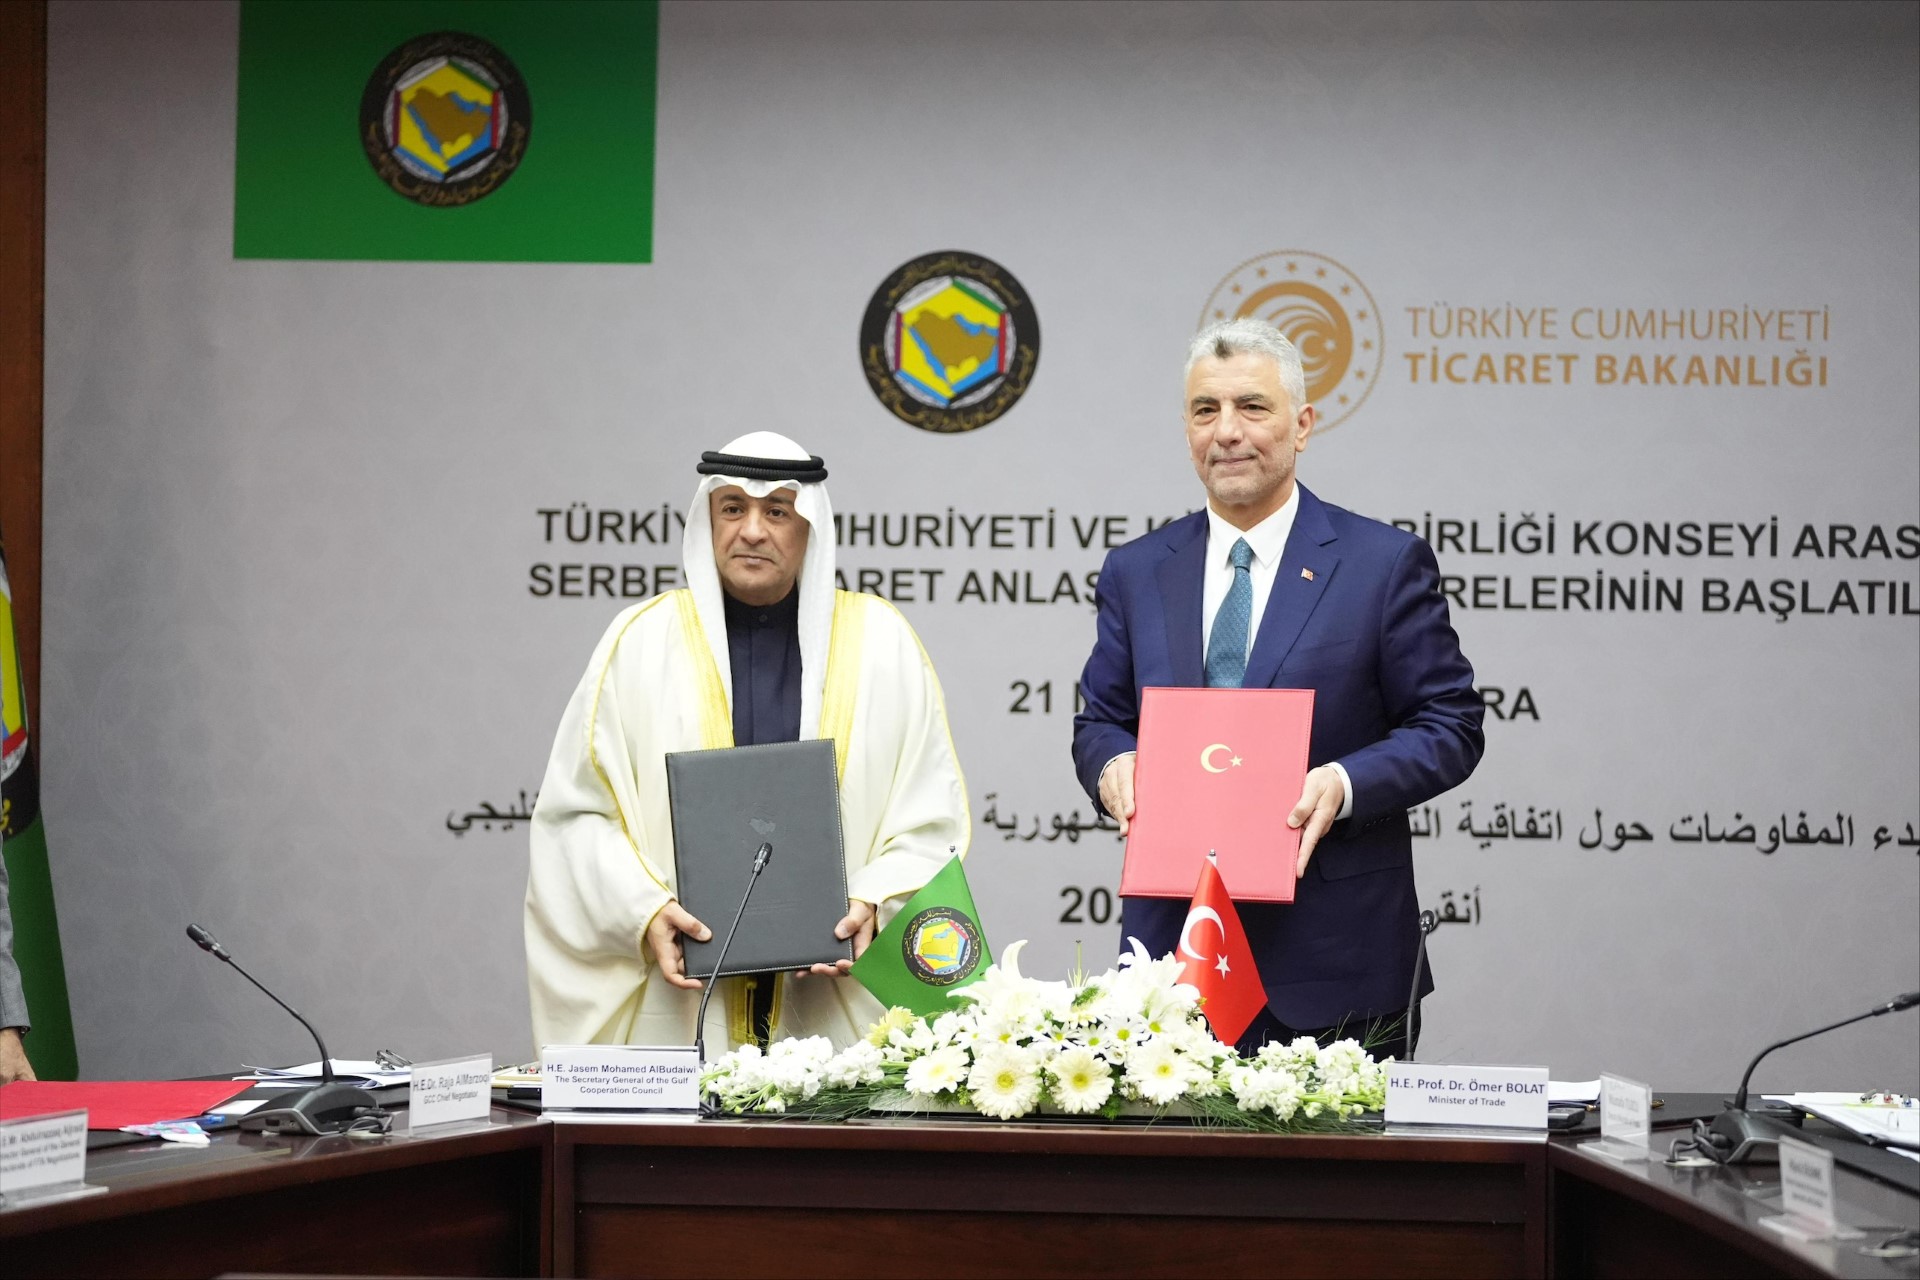 GCC Secretary General and Turkish Trade Minister